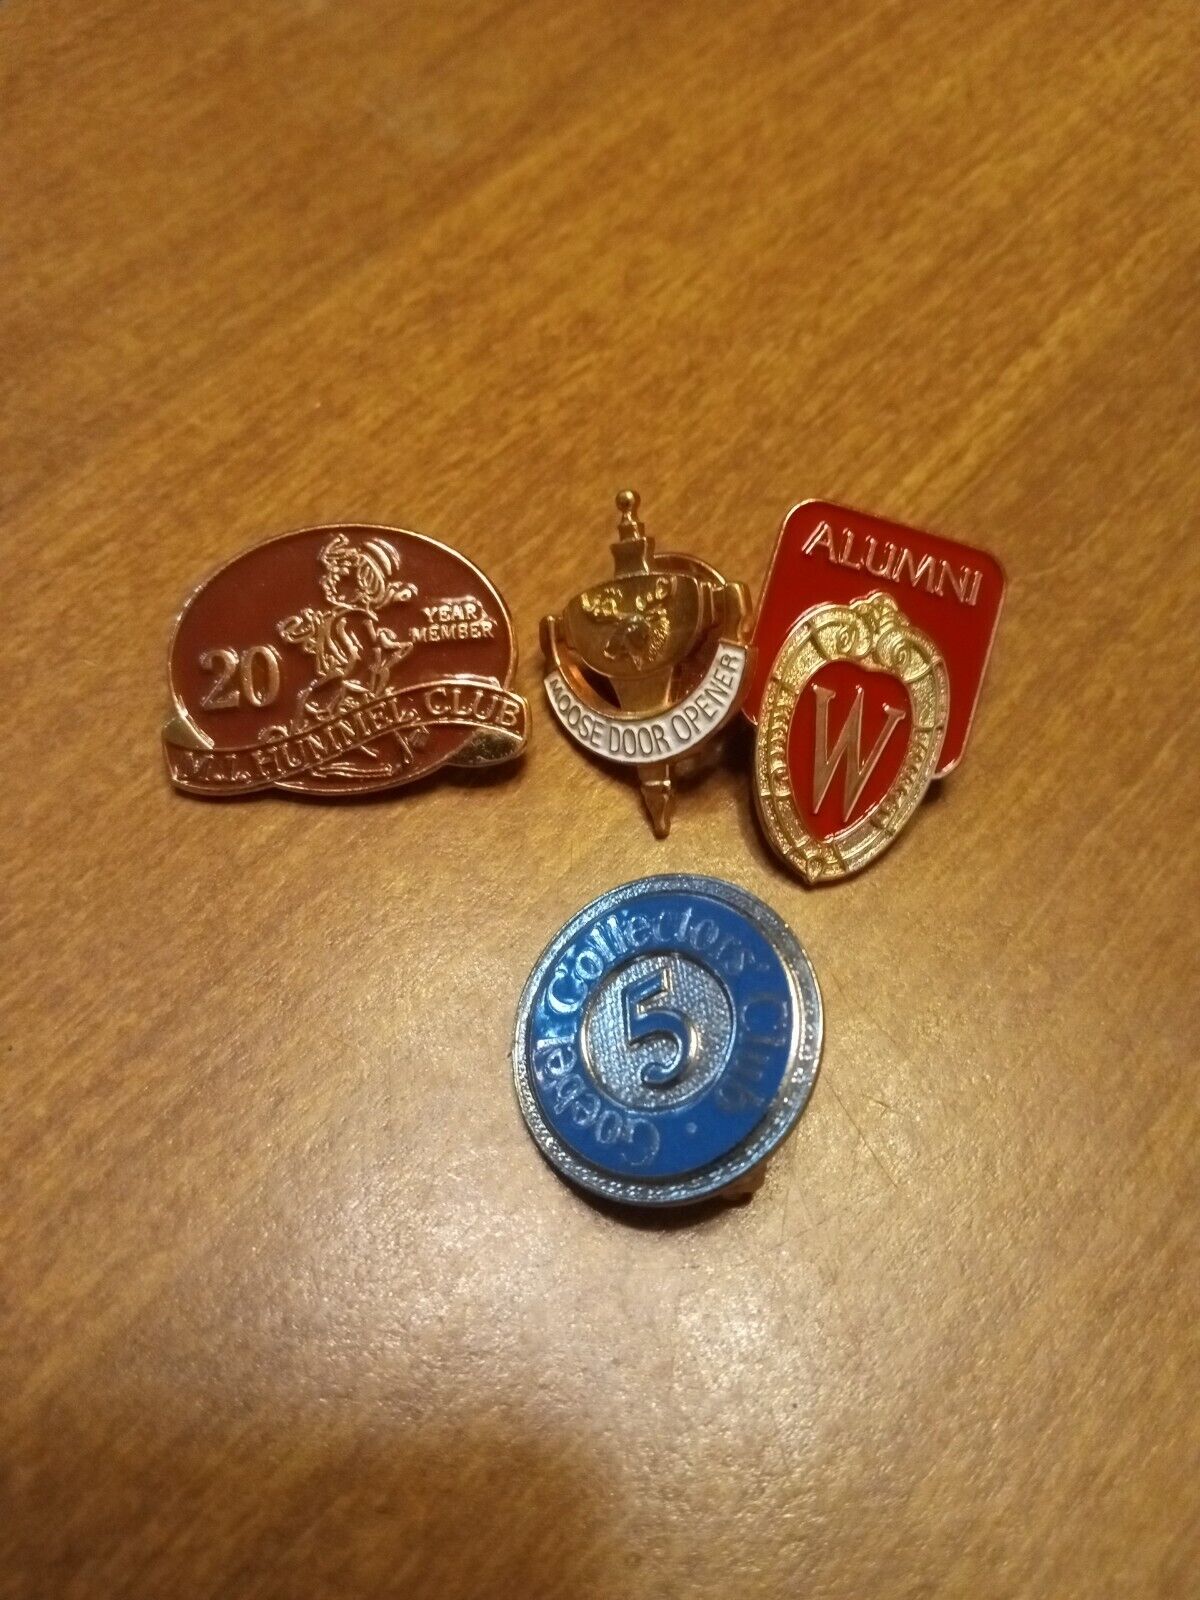 Vintage Club And Society Pins Lot Of 4 Metal Very Good Condition And Unique